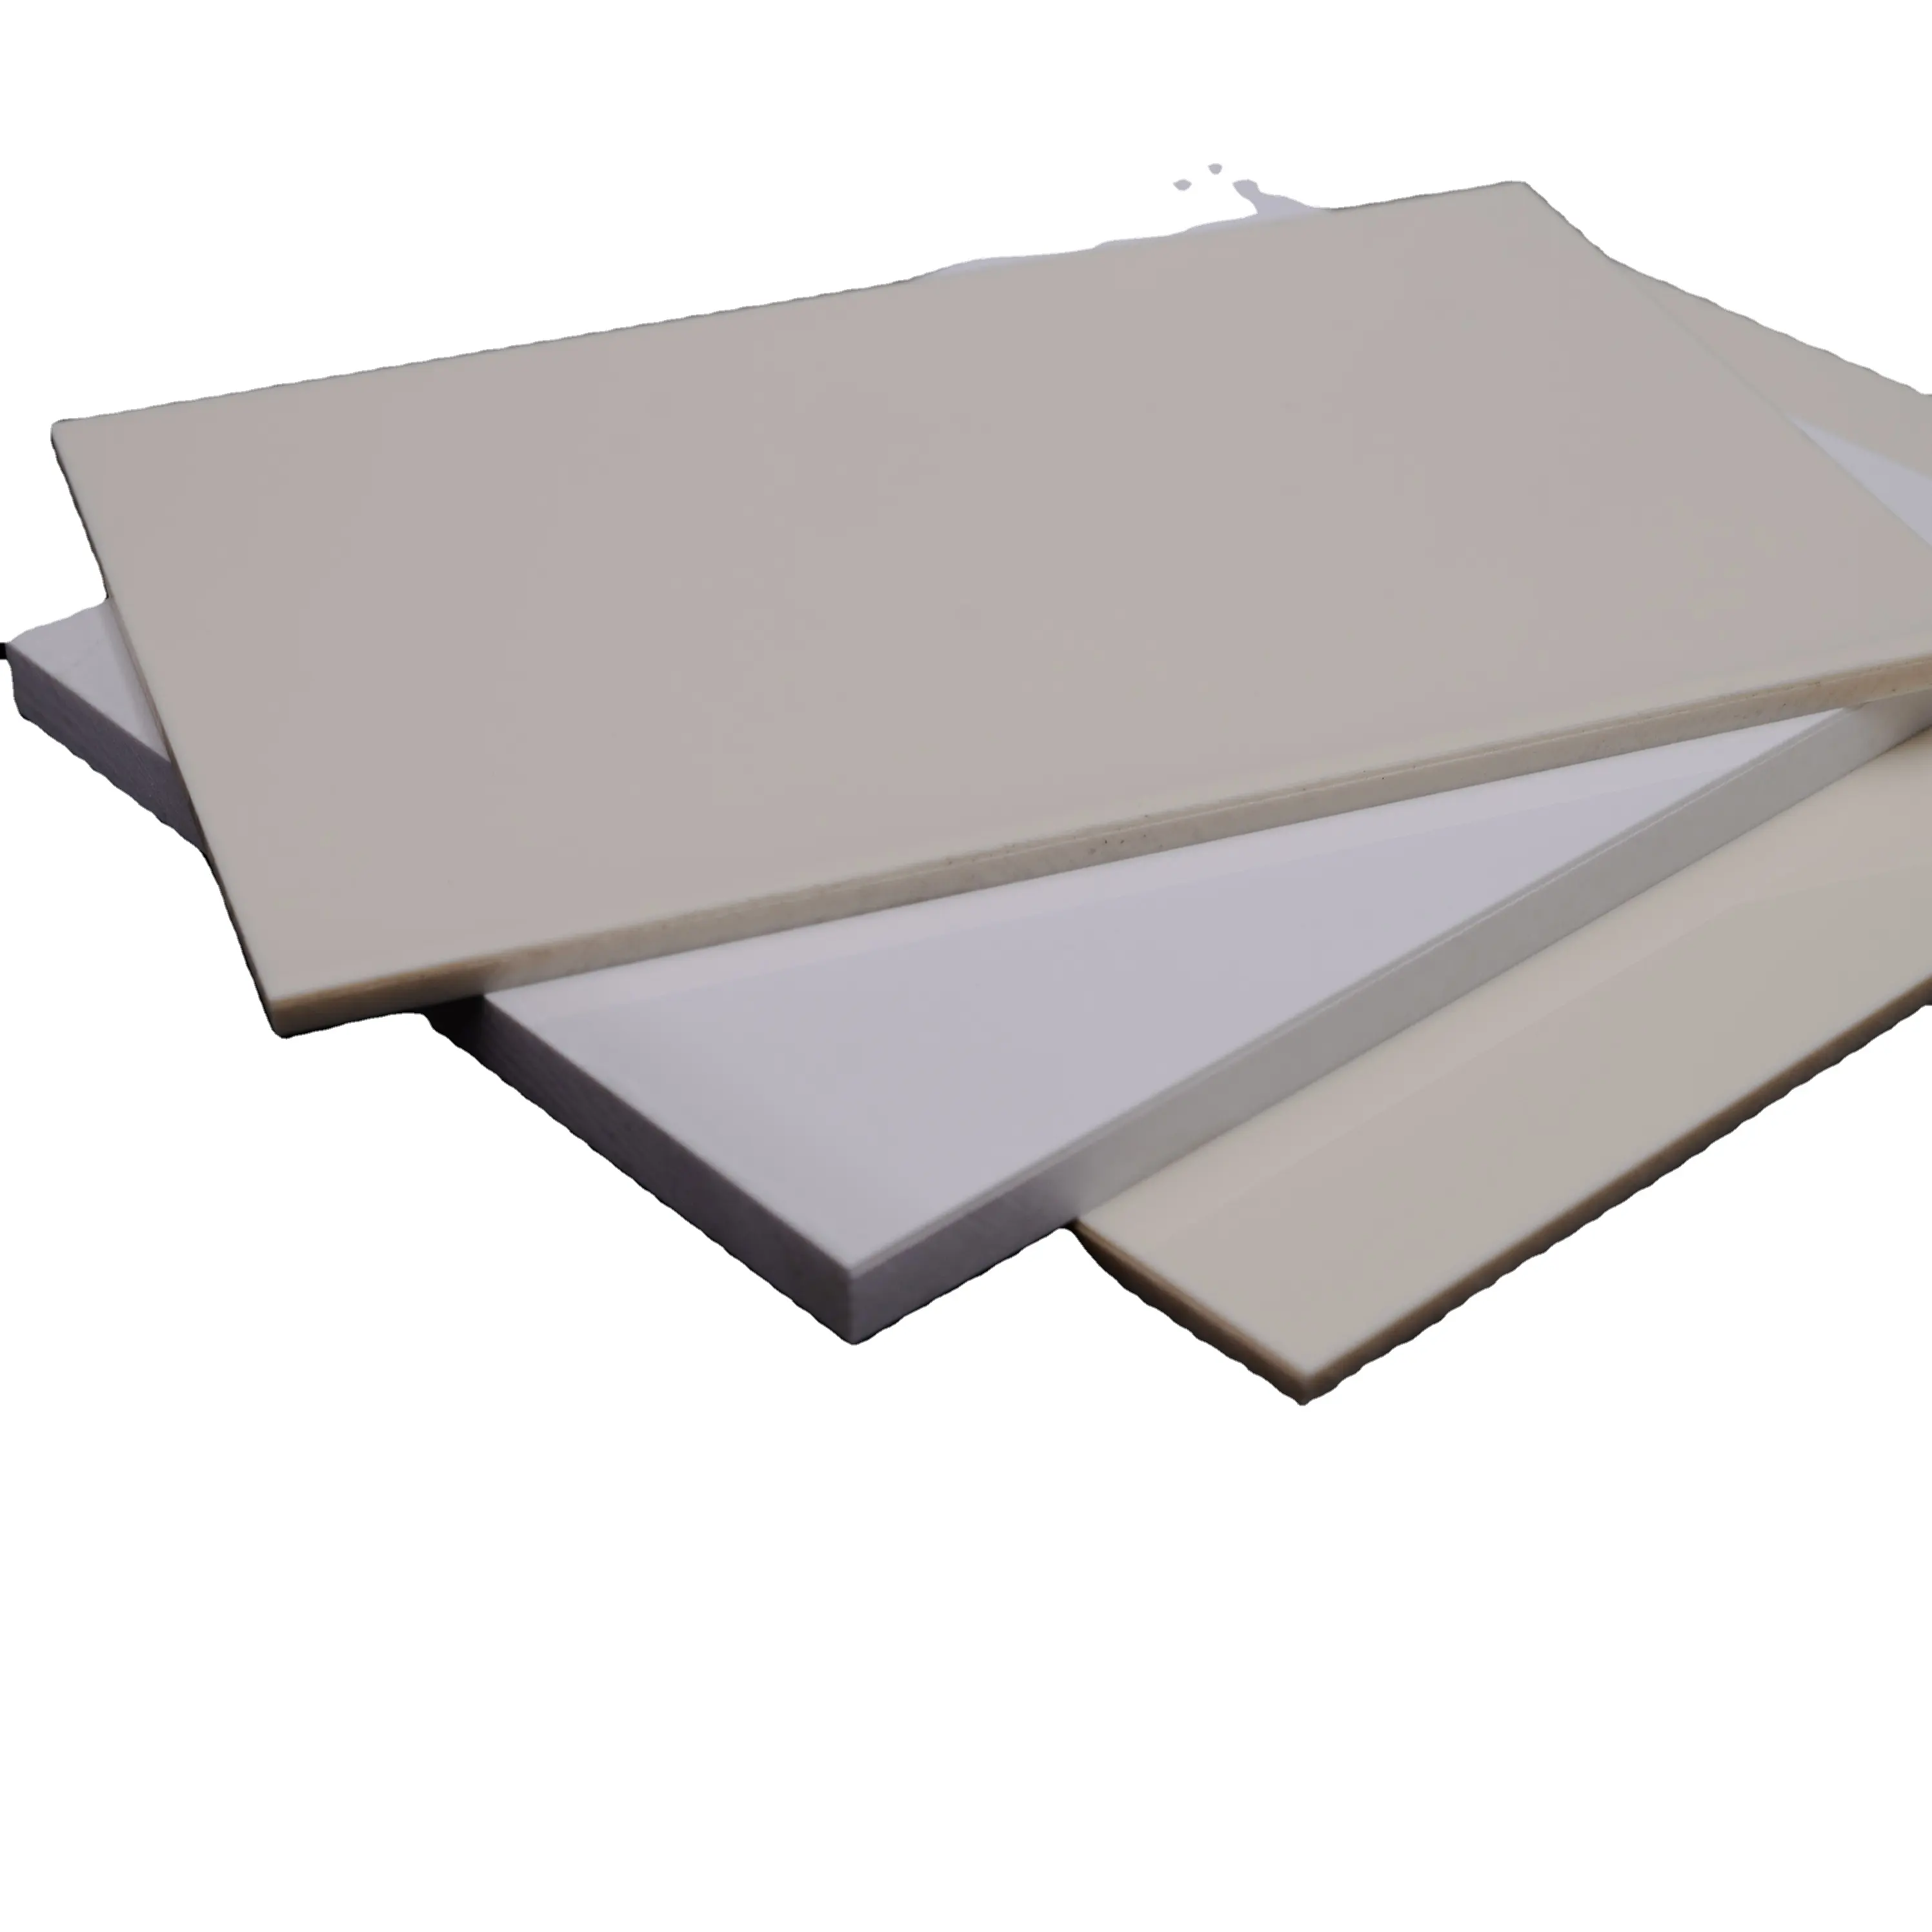 Andisco New Material 2-25mm Thick Acrylic PVC Sheet White/Opalescent/Grey Plastic PVC Board